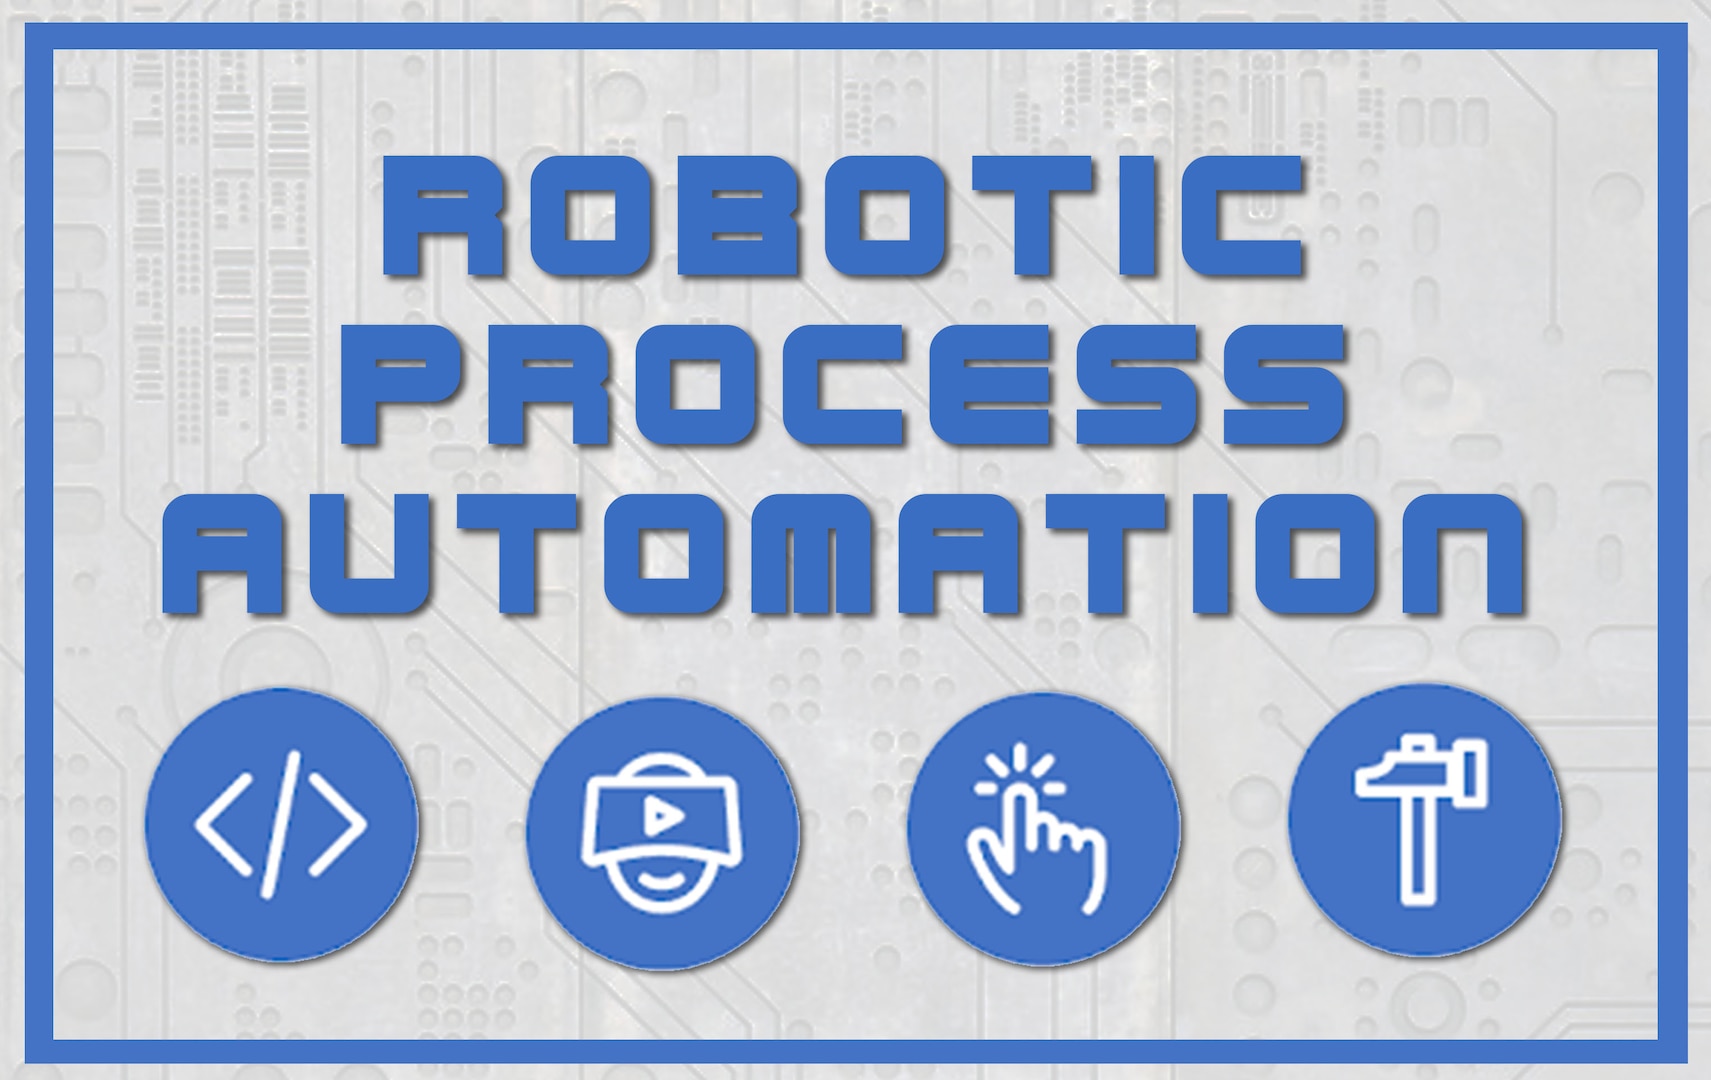 A grey background with a CG blue border. In the middle of the rectangular border is the words stacked in vertical fashion "Robotic Process Automation" and then four relevant logos inside of circular frames towards the bottom of the graphic.